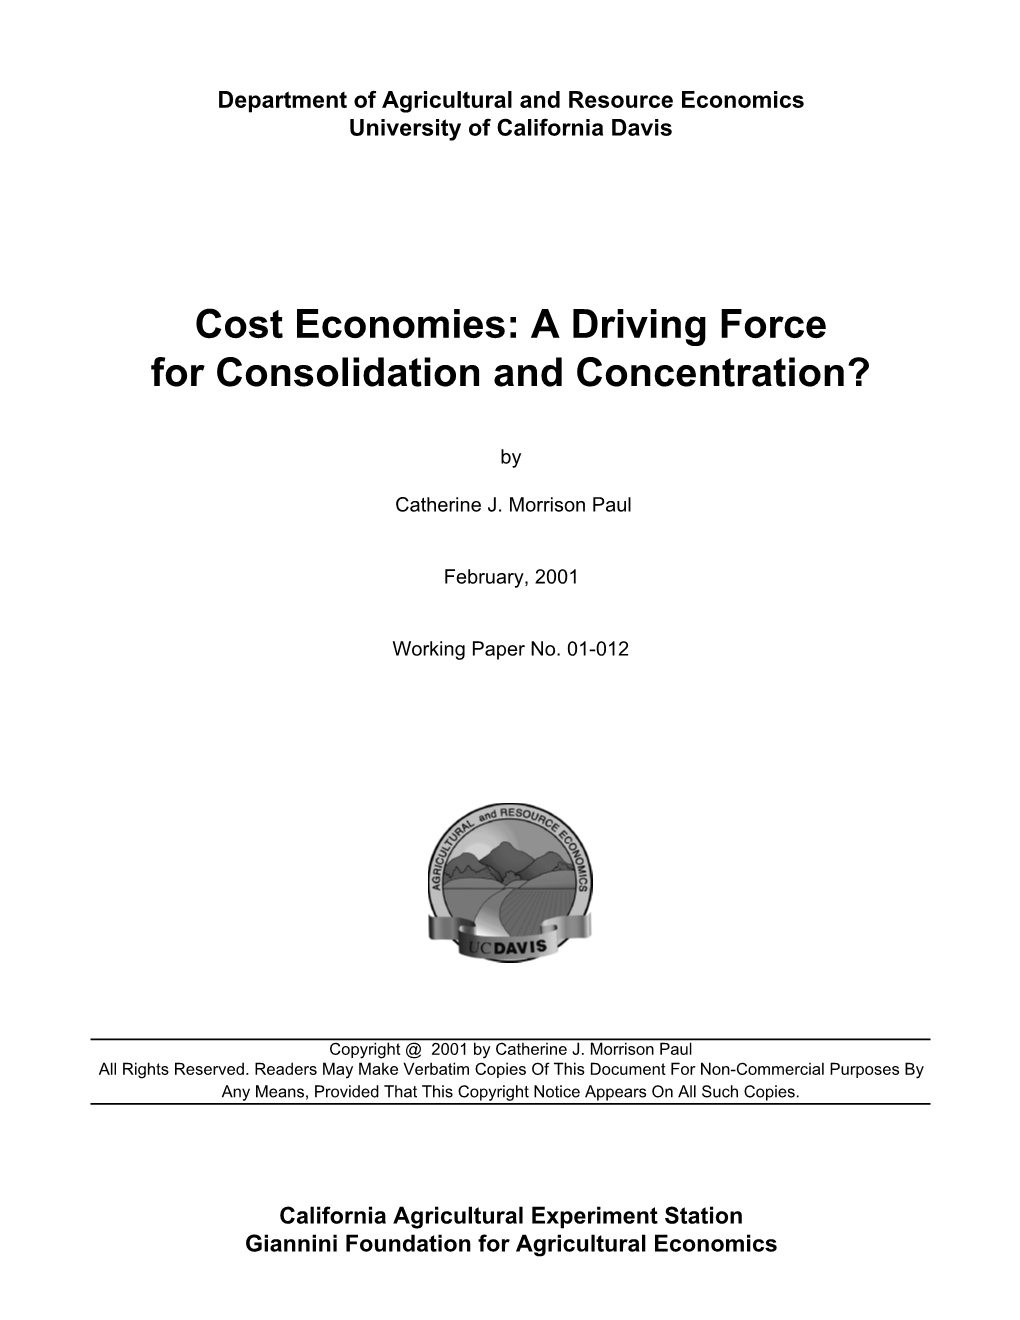 Cost Economies: a Driving Force for Consolidation and Concentration?